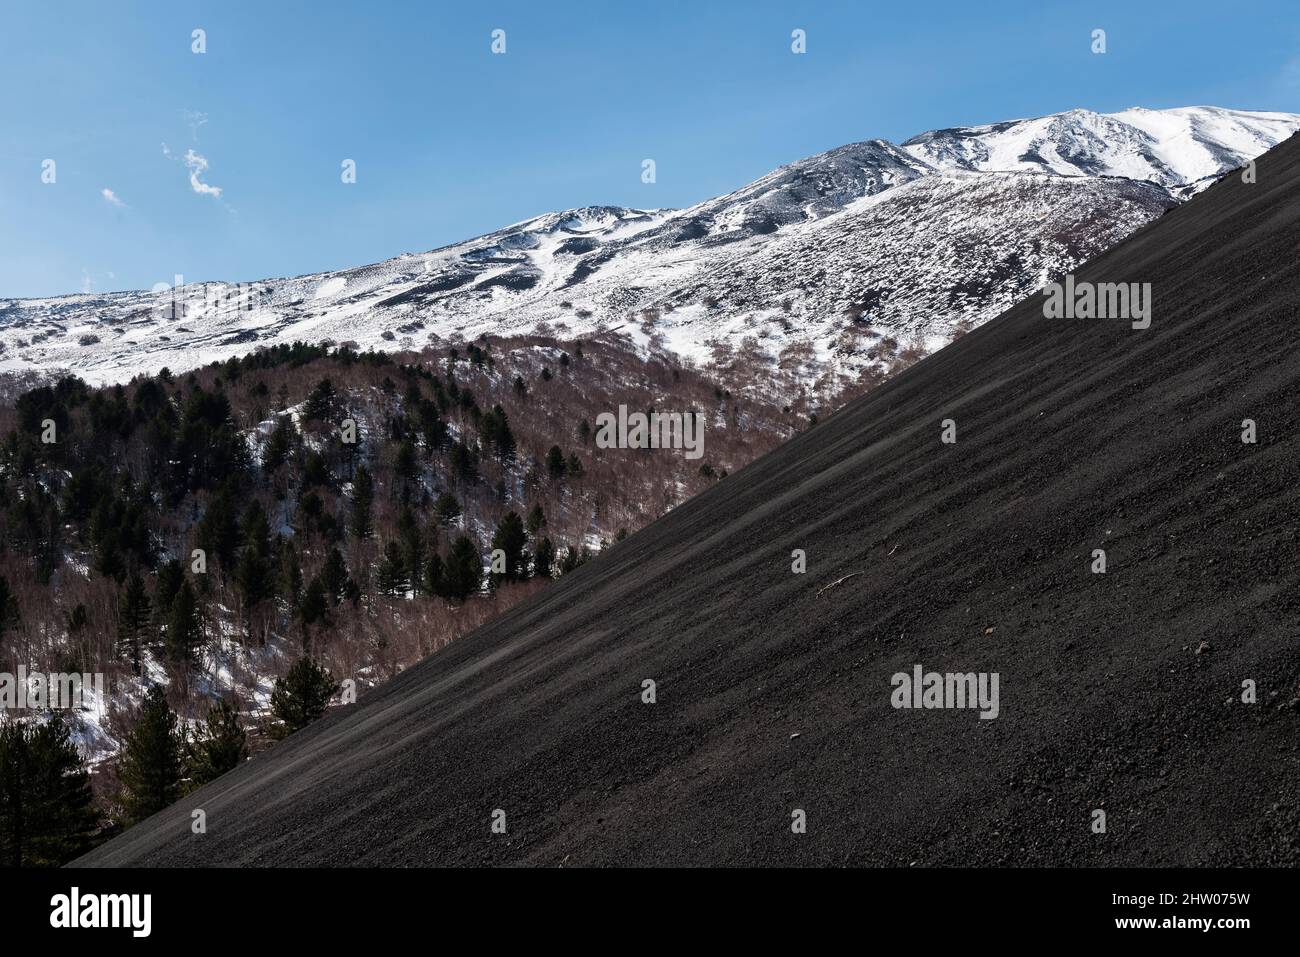 Black volcanic ash covers a flank crater on the side of Mount Etna (3357m), Sicily, Italy, seen in late winter Stock Photo